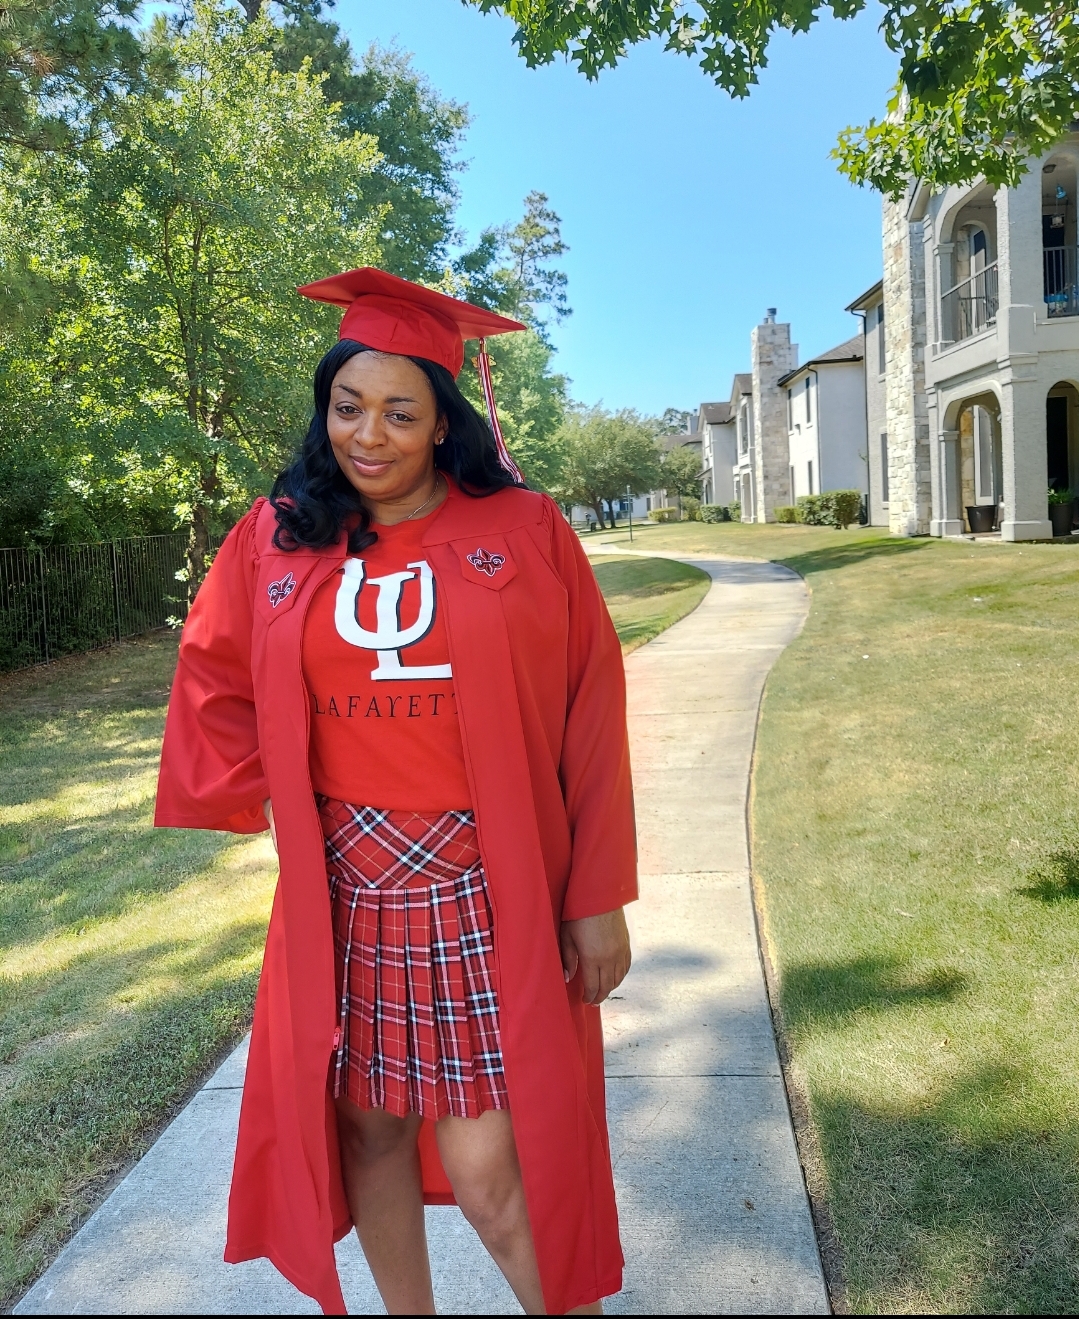 Shira Taylor graduated with her BSBA in Management from the University's online program